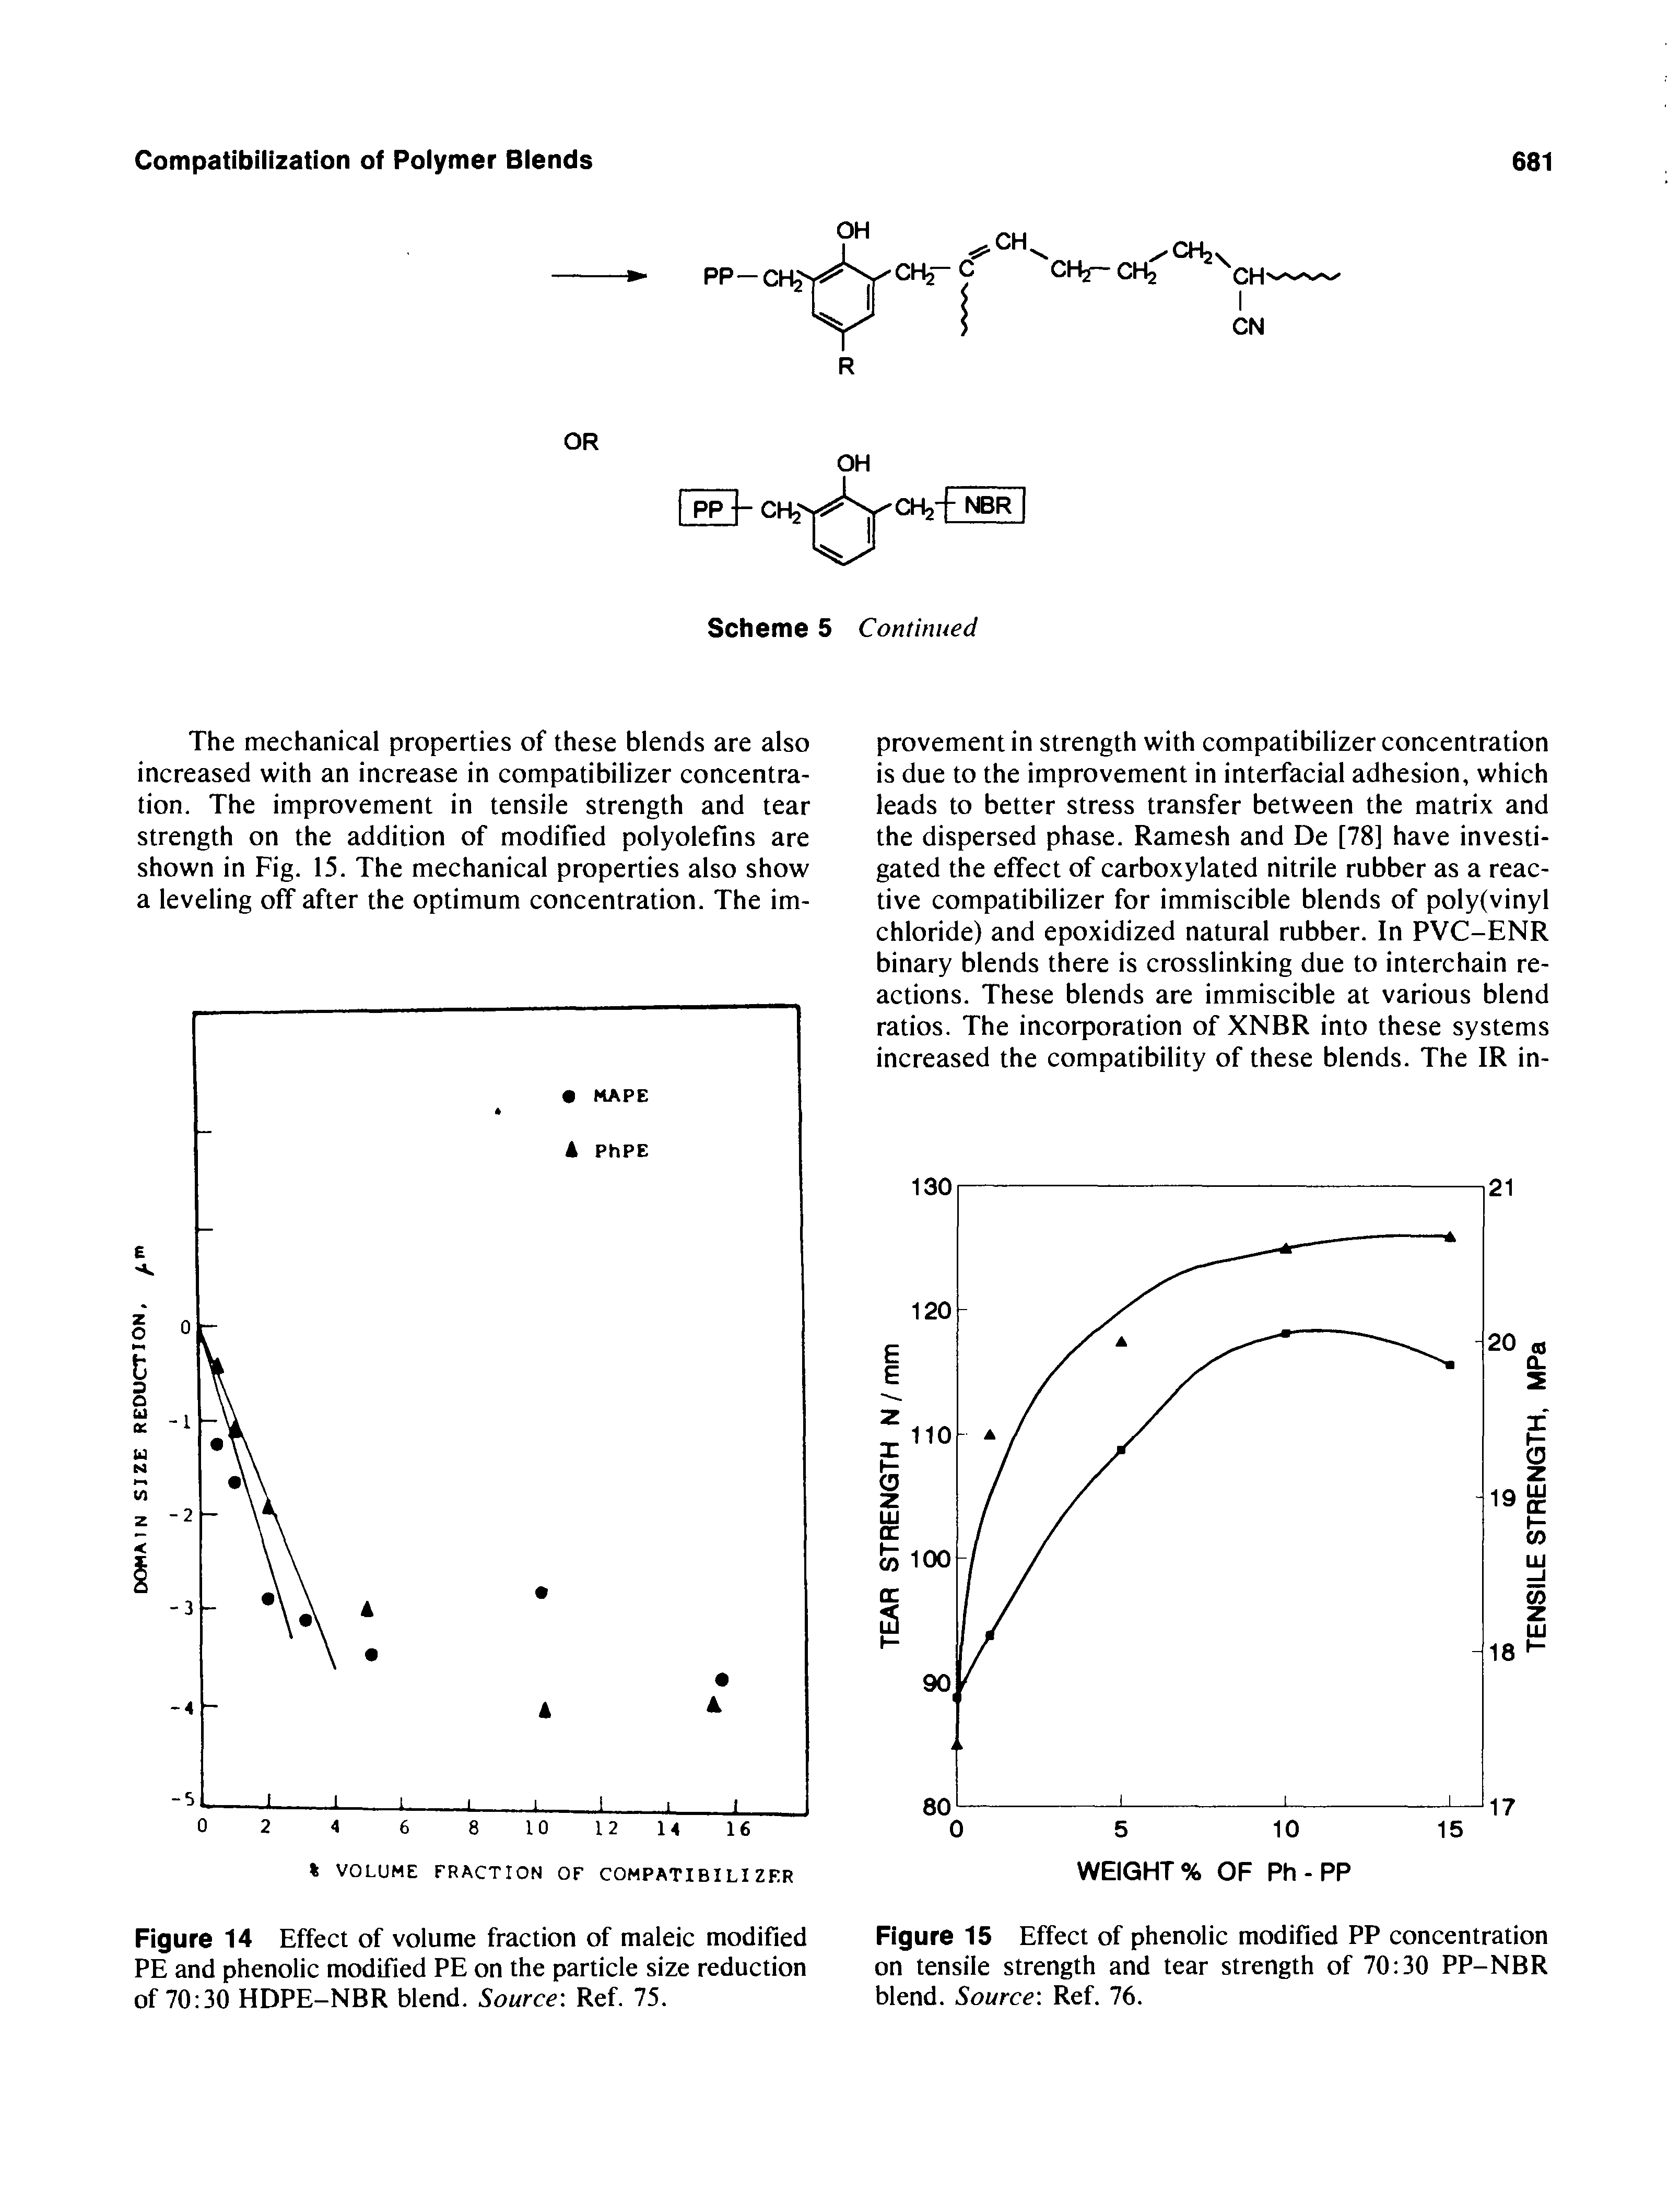 Figure 15 Effect of phenolic modified PP concentration on tensile strength and tear strength of 70 30 PP-NBR blend. Source Ref. 76.